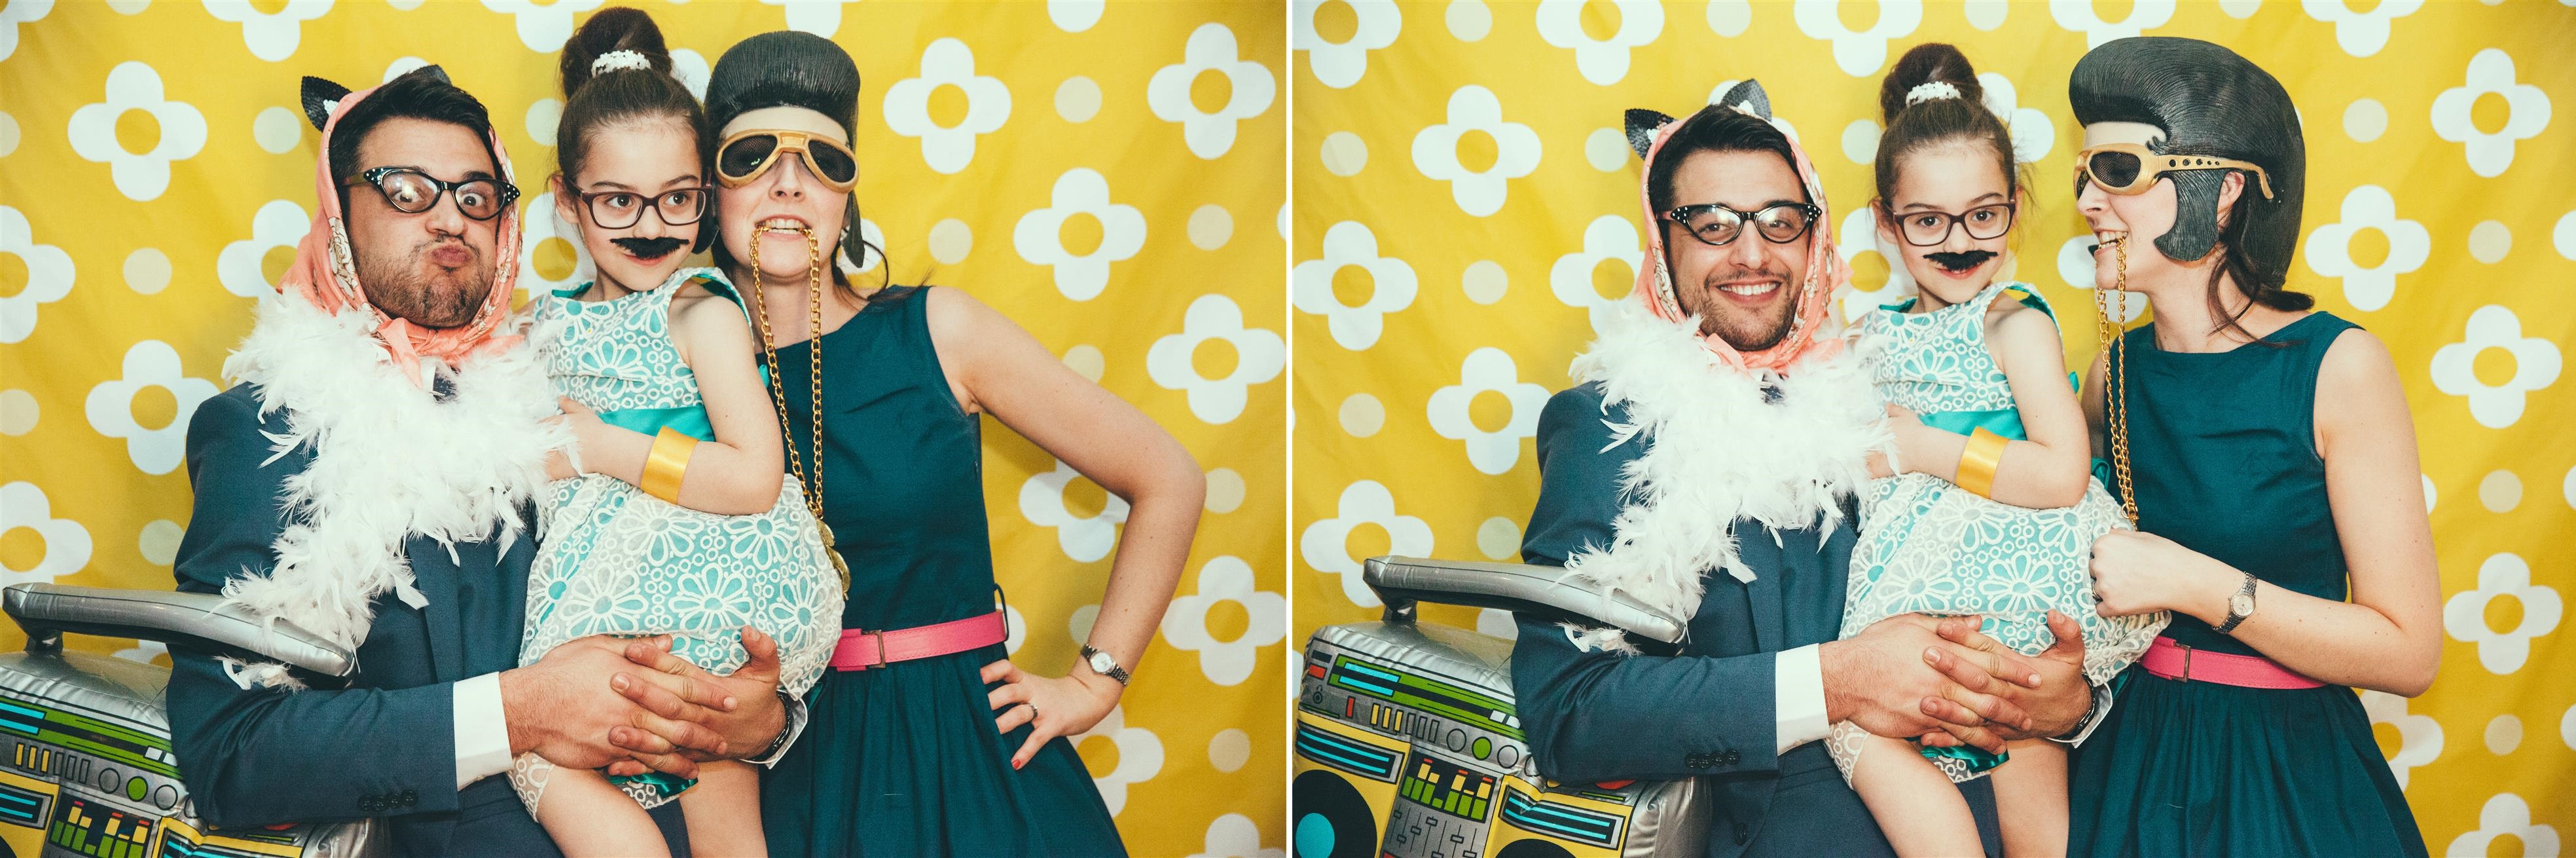 Photobooth - A Spring 1960s Inspired Wedding